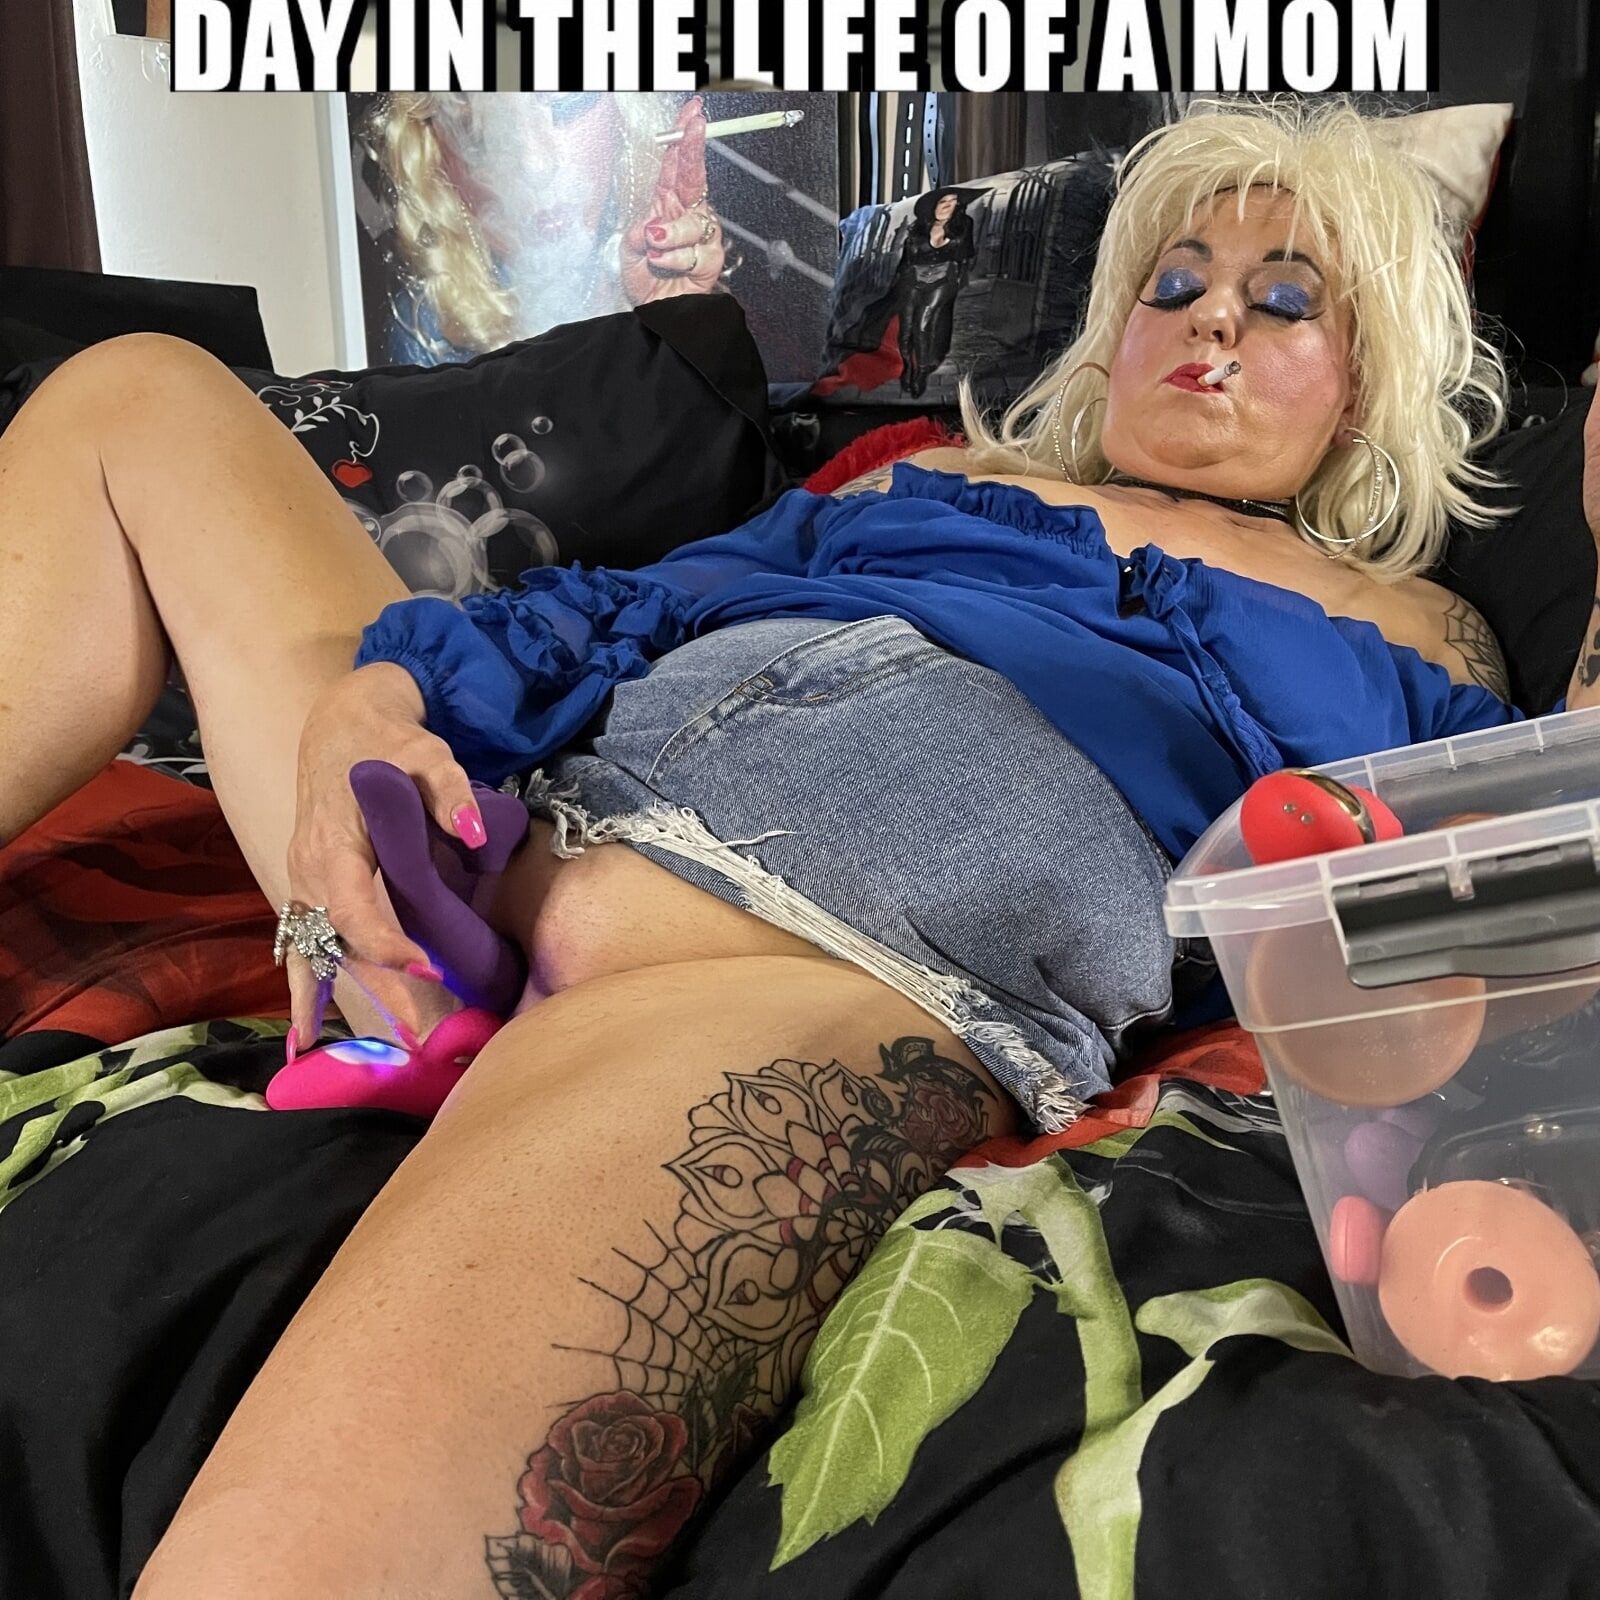 DAY IN THE LIFE OF A MOM SHIRLEY #8